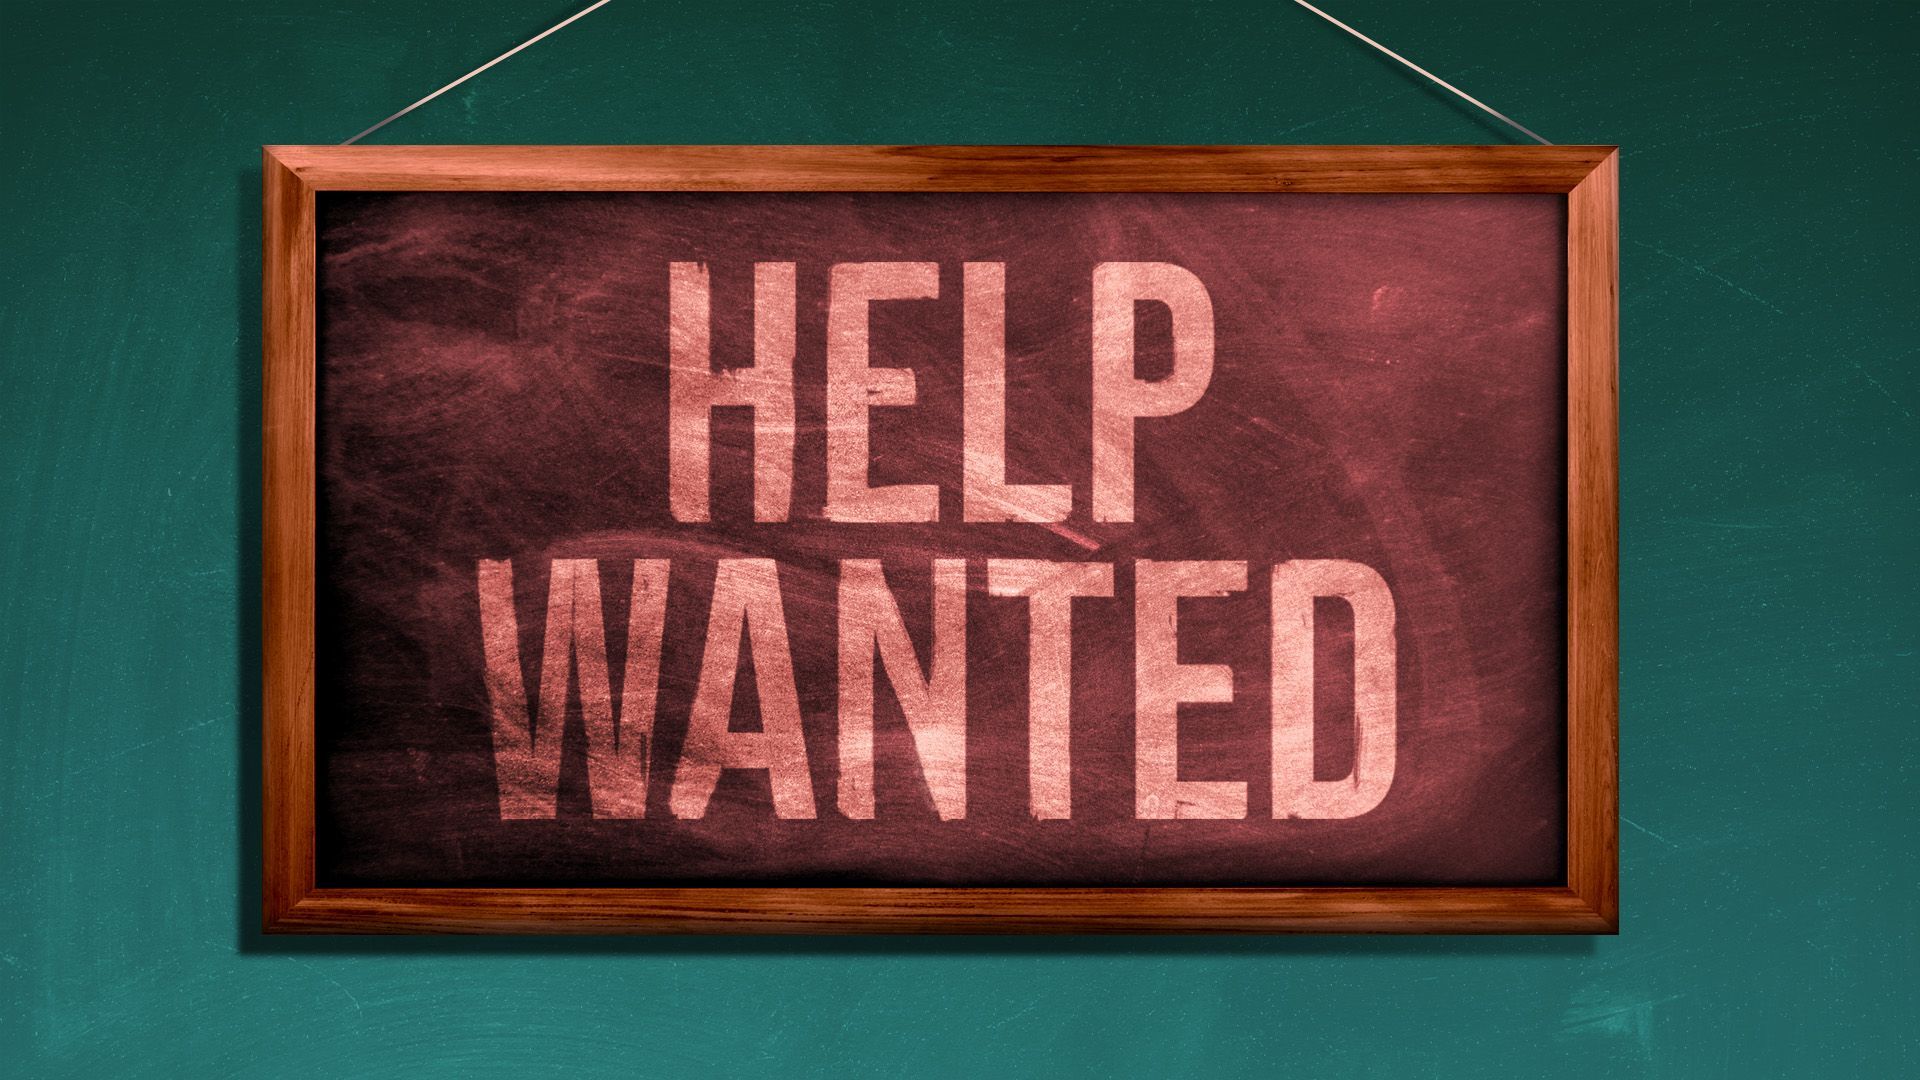 Illustration of a "help wanted" sign as a chalkboard